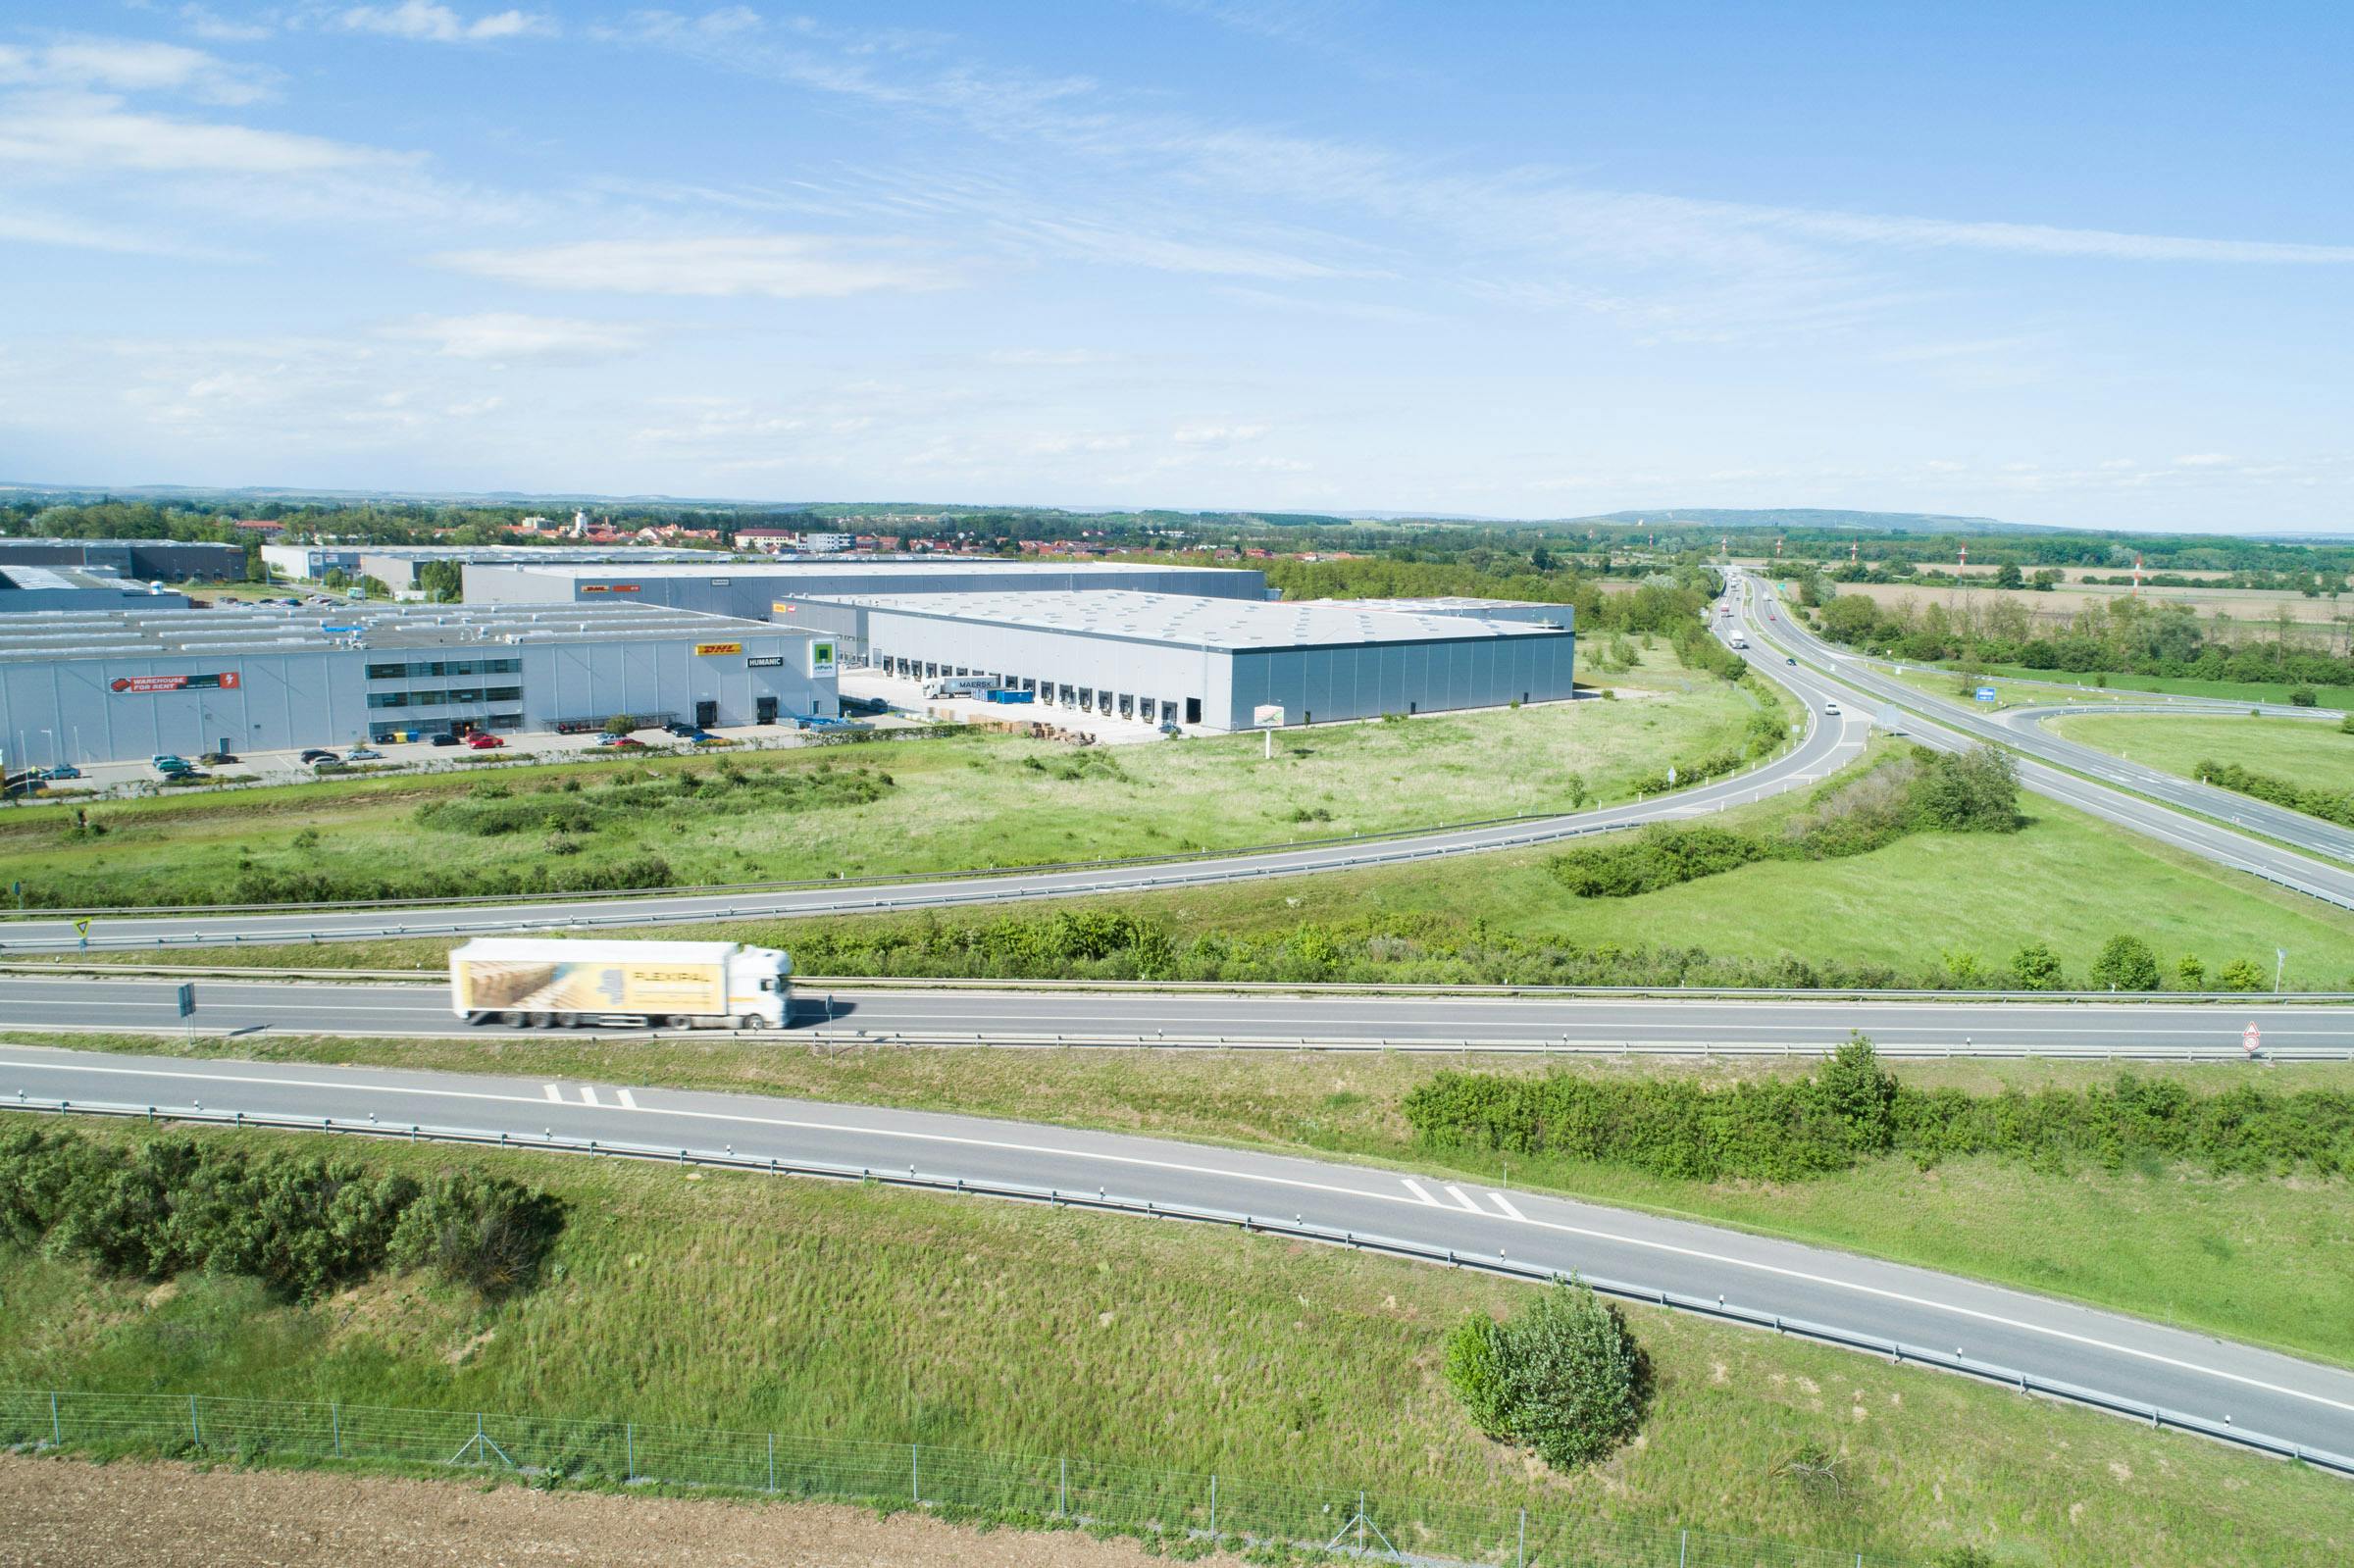 CTPark Pohořelice - rental of warehouse and production space